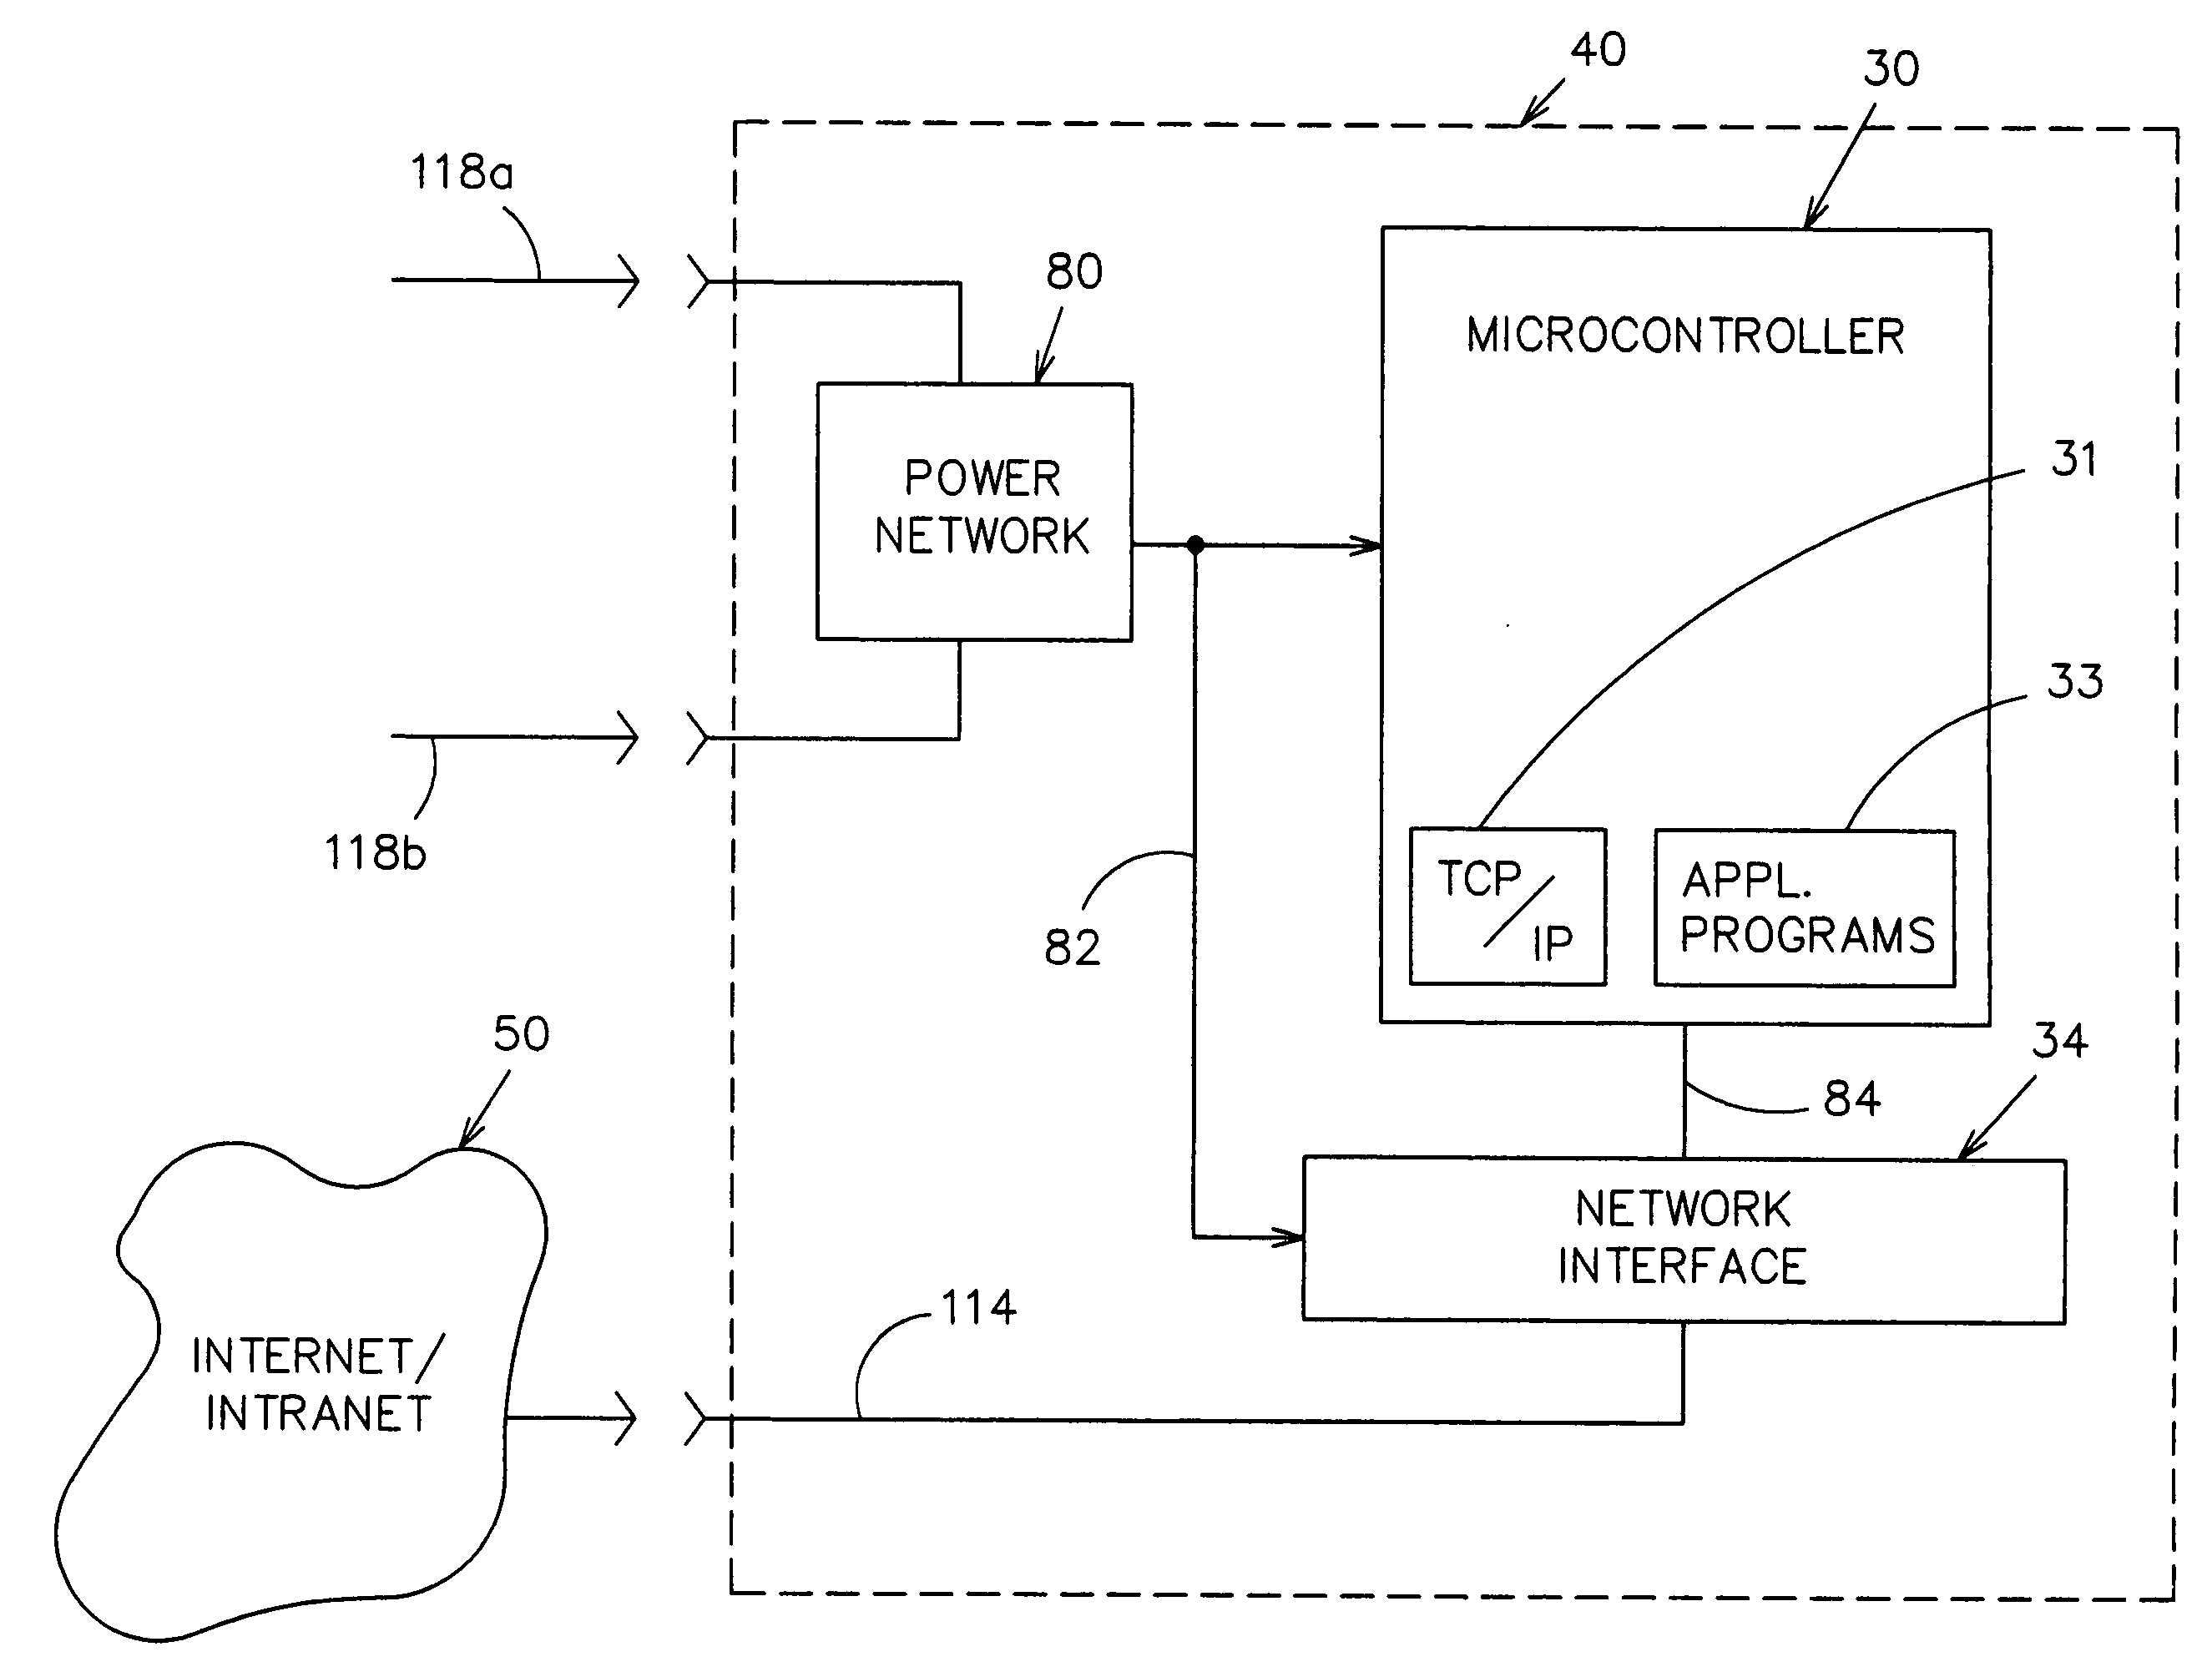 Internet/intranet-connected apparatus